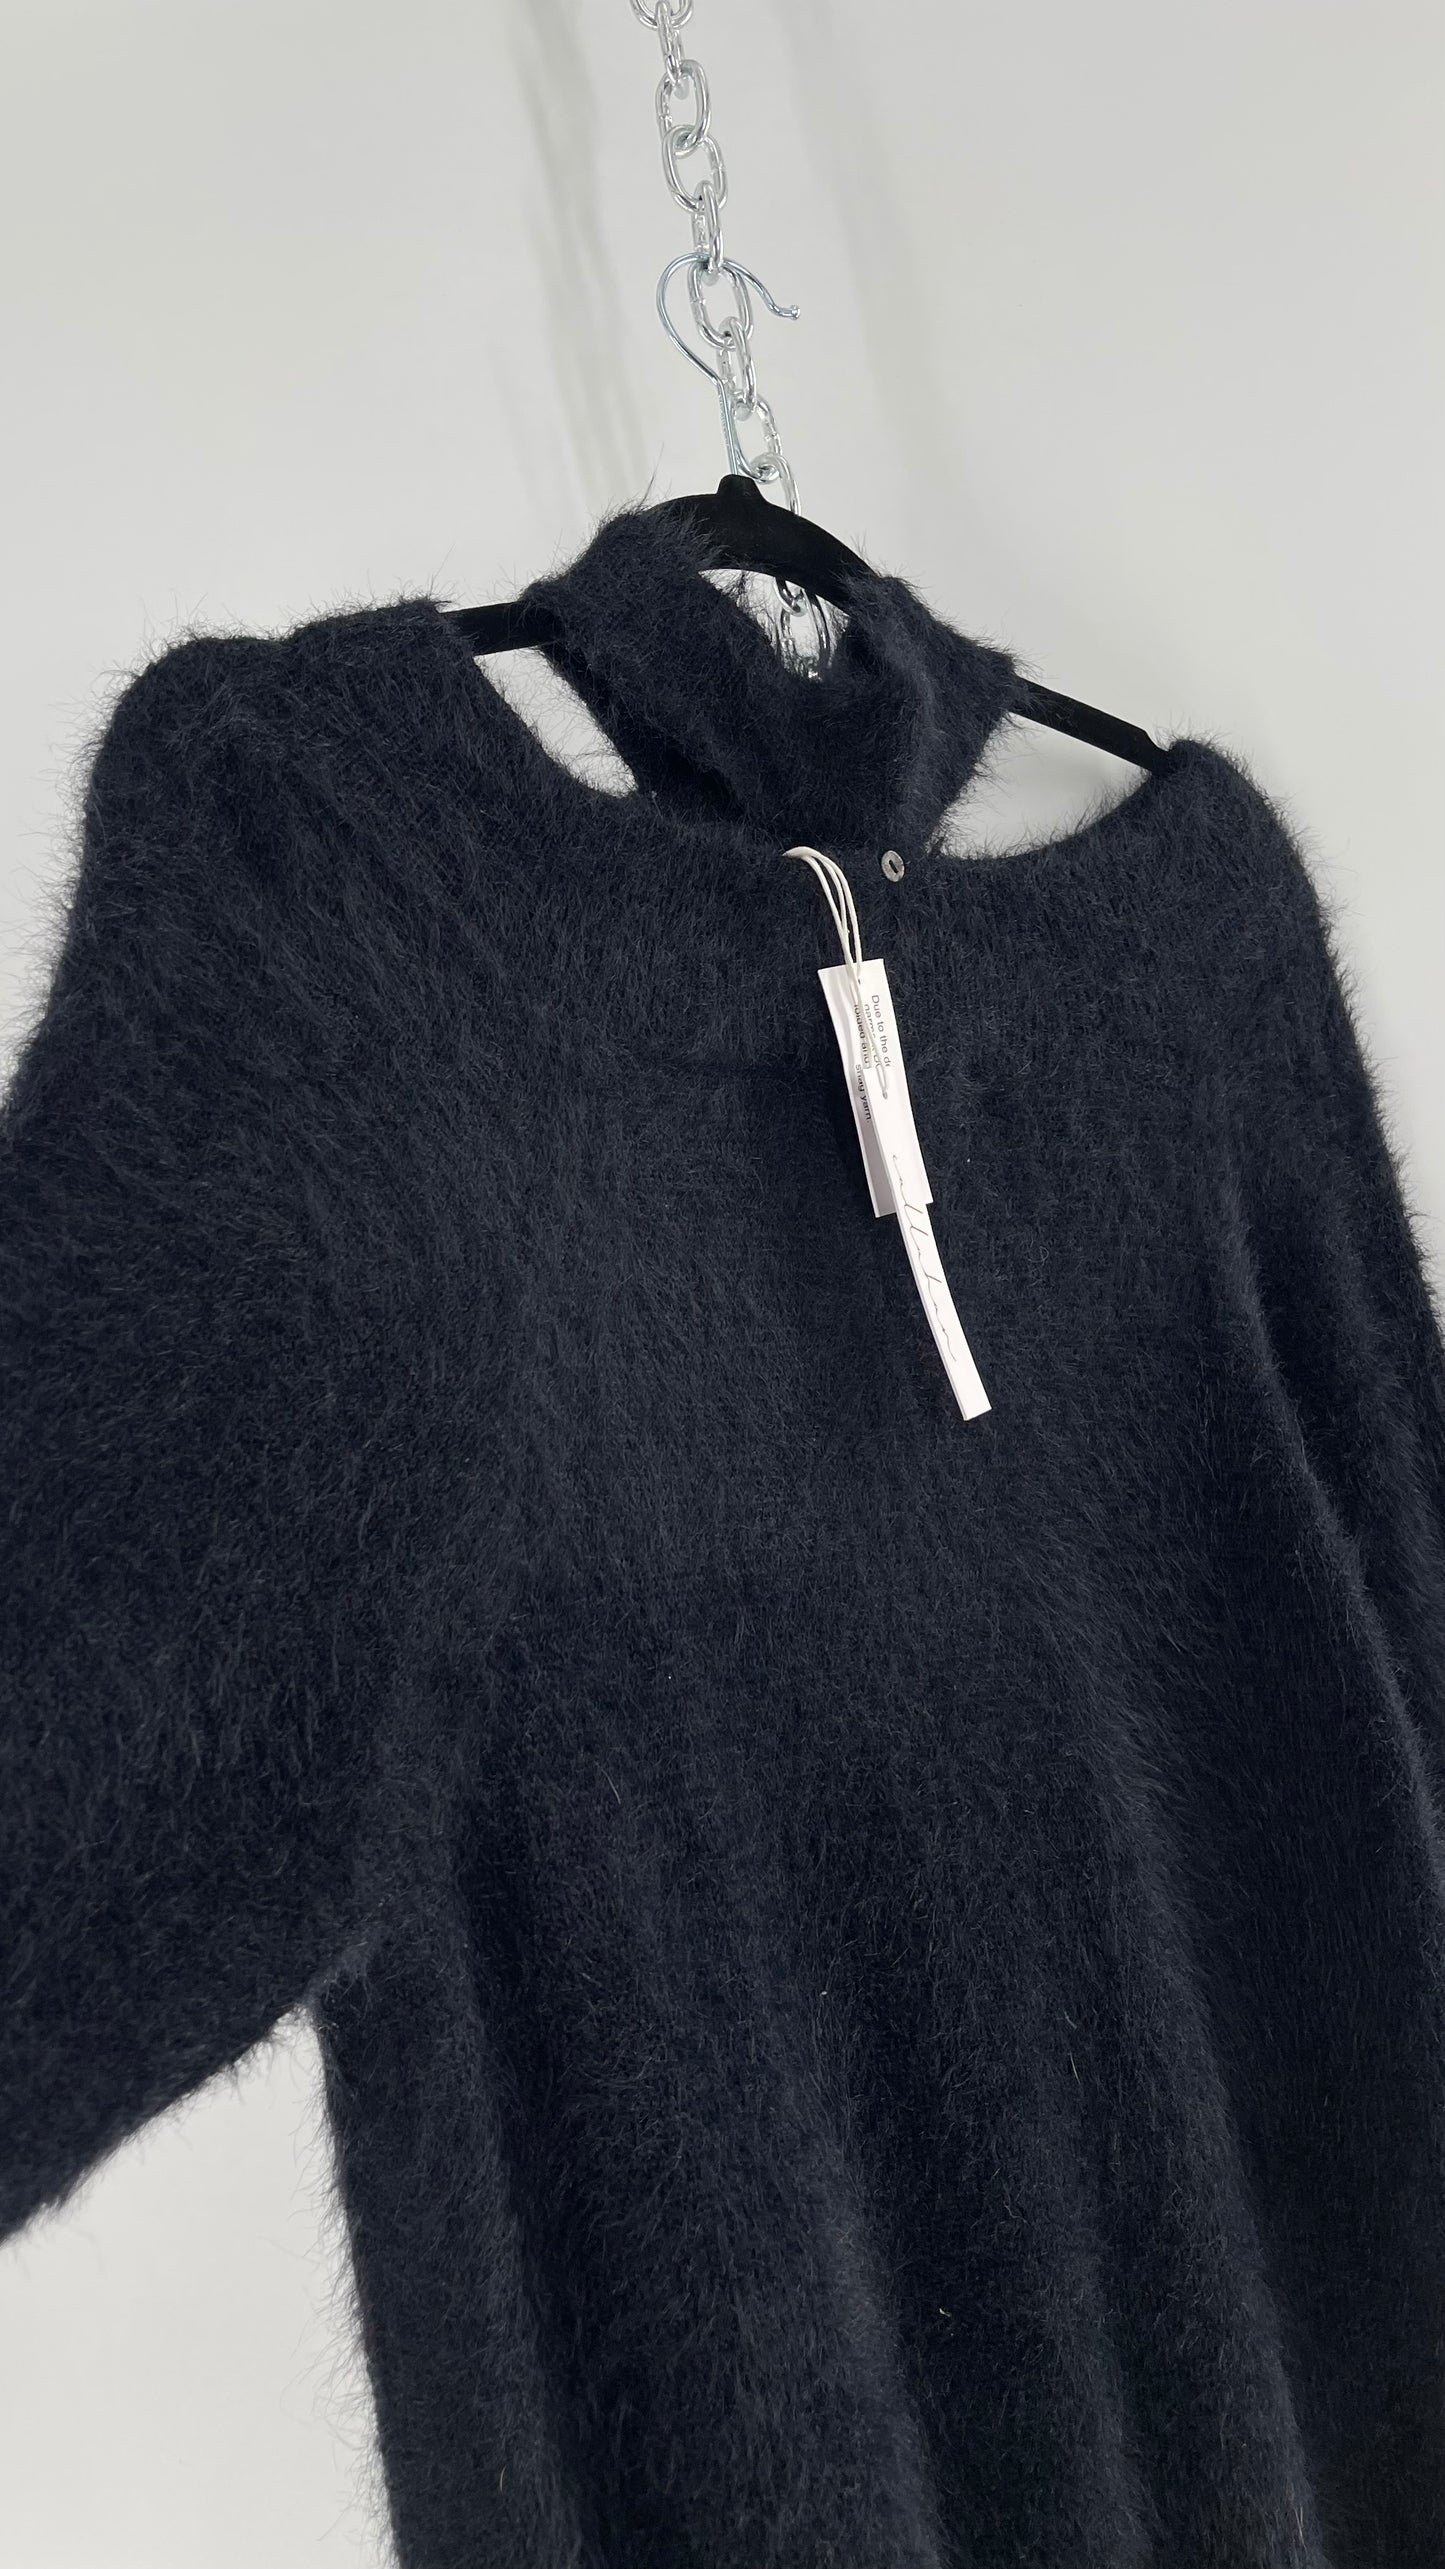 Callahan Black Fuzzy/Shaggy Slouchy Sweater with Choker Neckline Detail (Small)